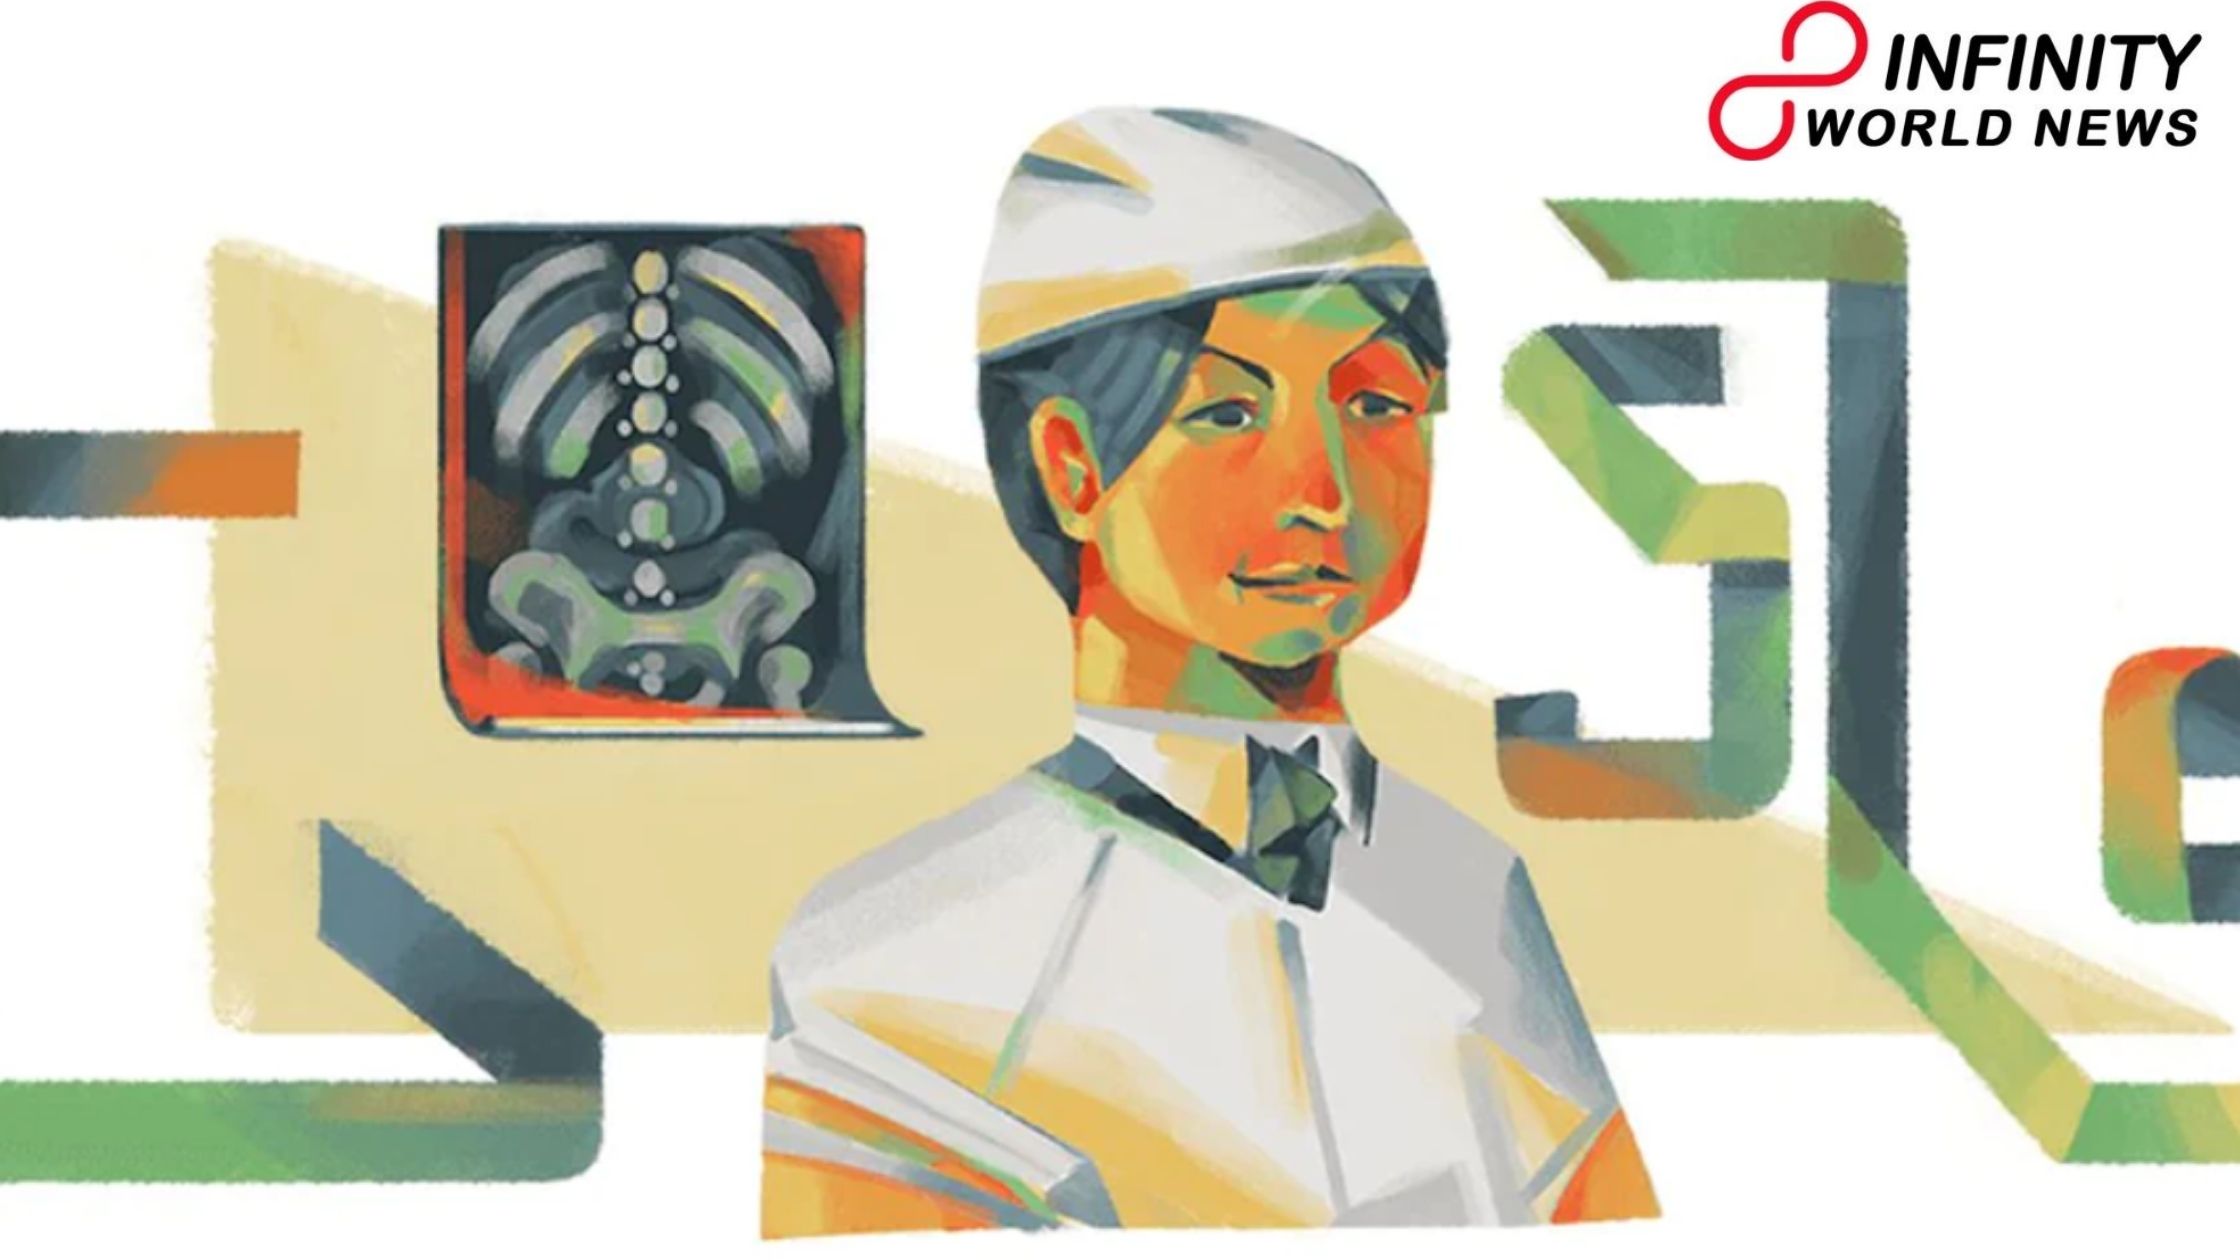 Vera Gedroits' 151st Birth Anniversary Celebrated in Google Doodle